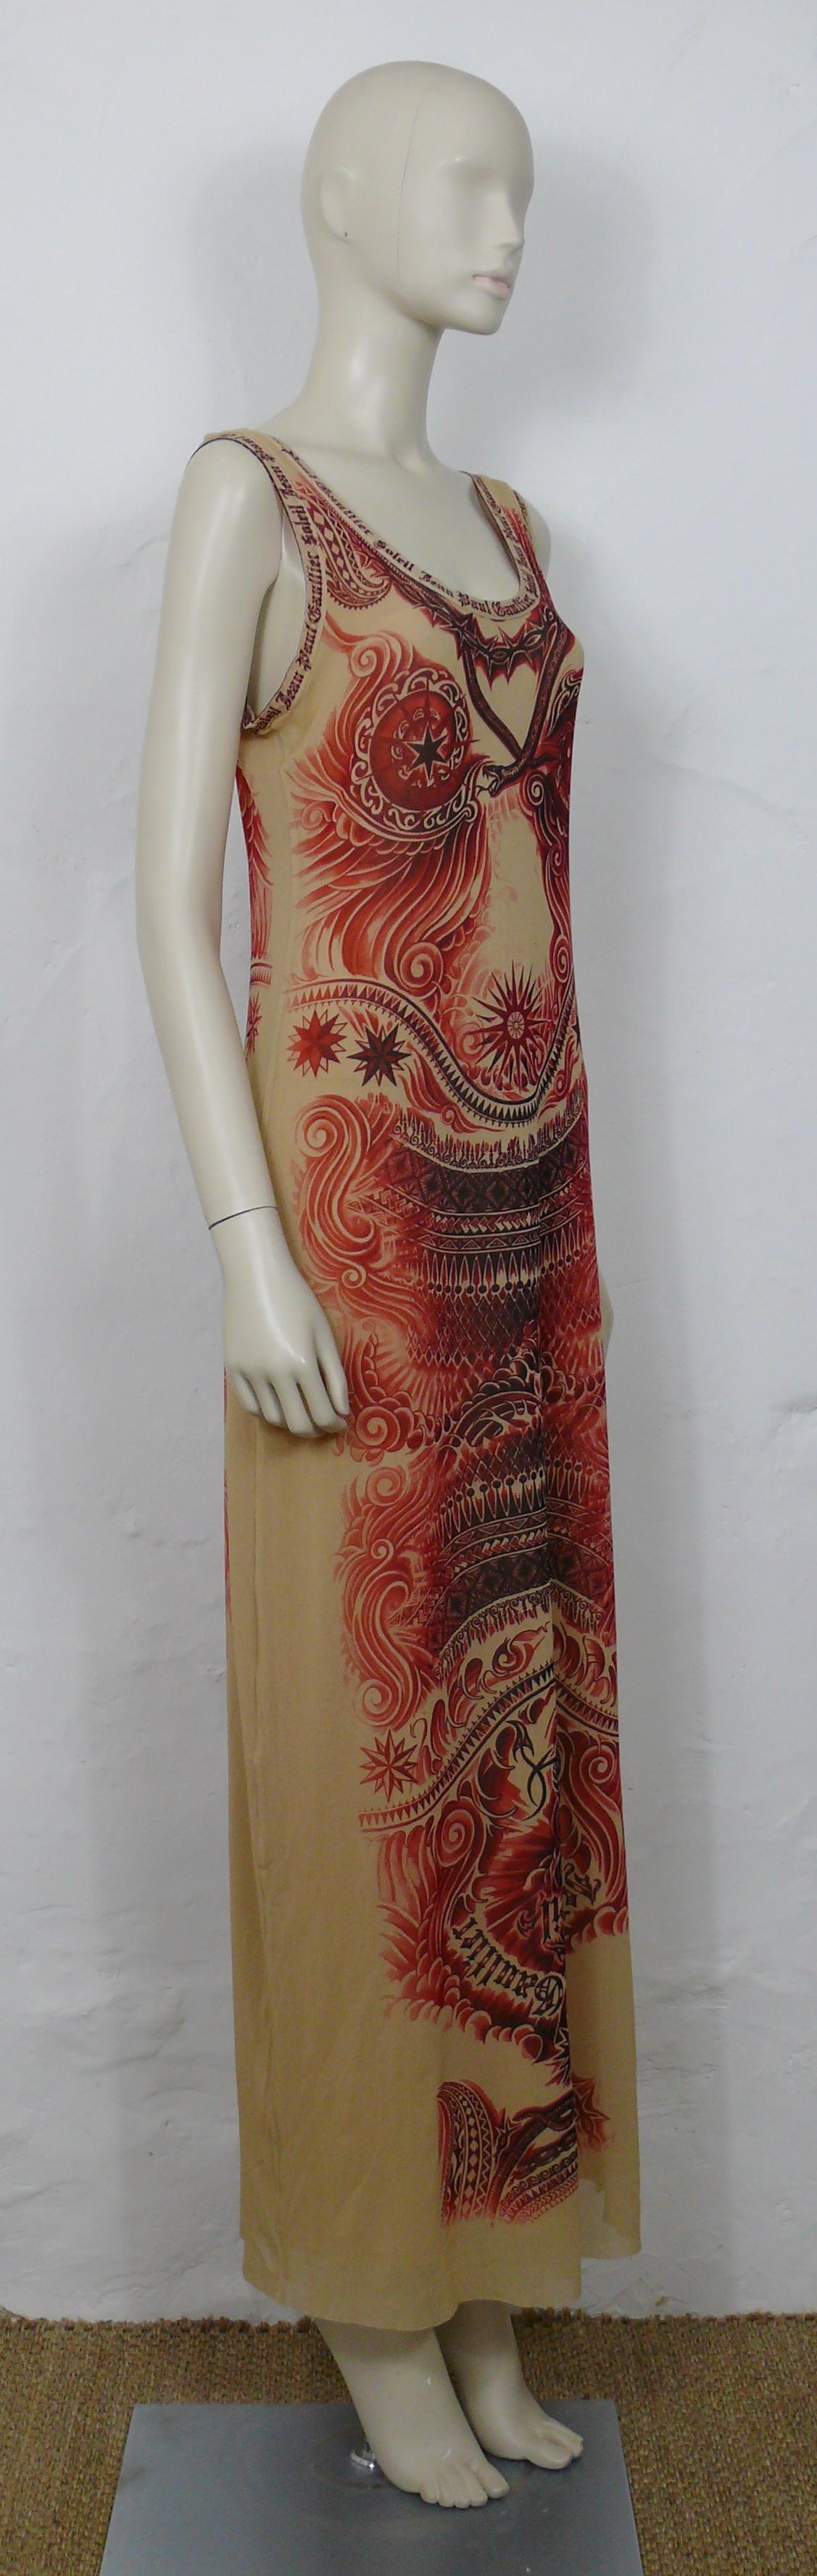 JEAN PAUL GAULTIER vintage skin coloured semi sheer mesh maxi dress featuring a gorgeous and opulent tattoo print in red shades with friezes, scrolls, stars, compass roses, barbed wires, snakes and 